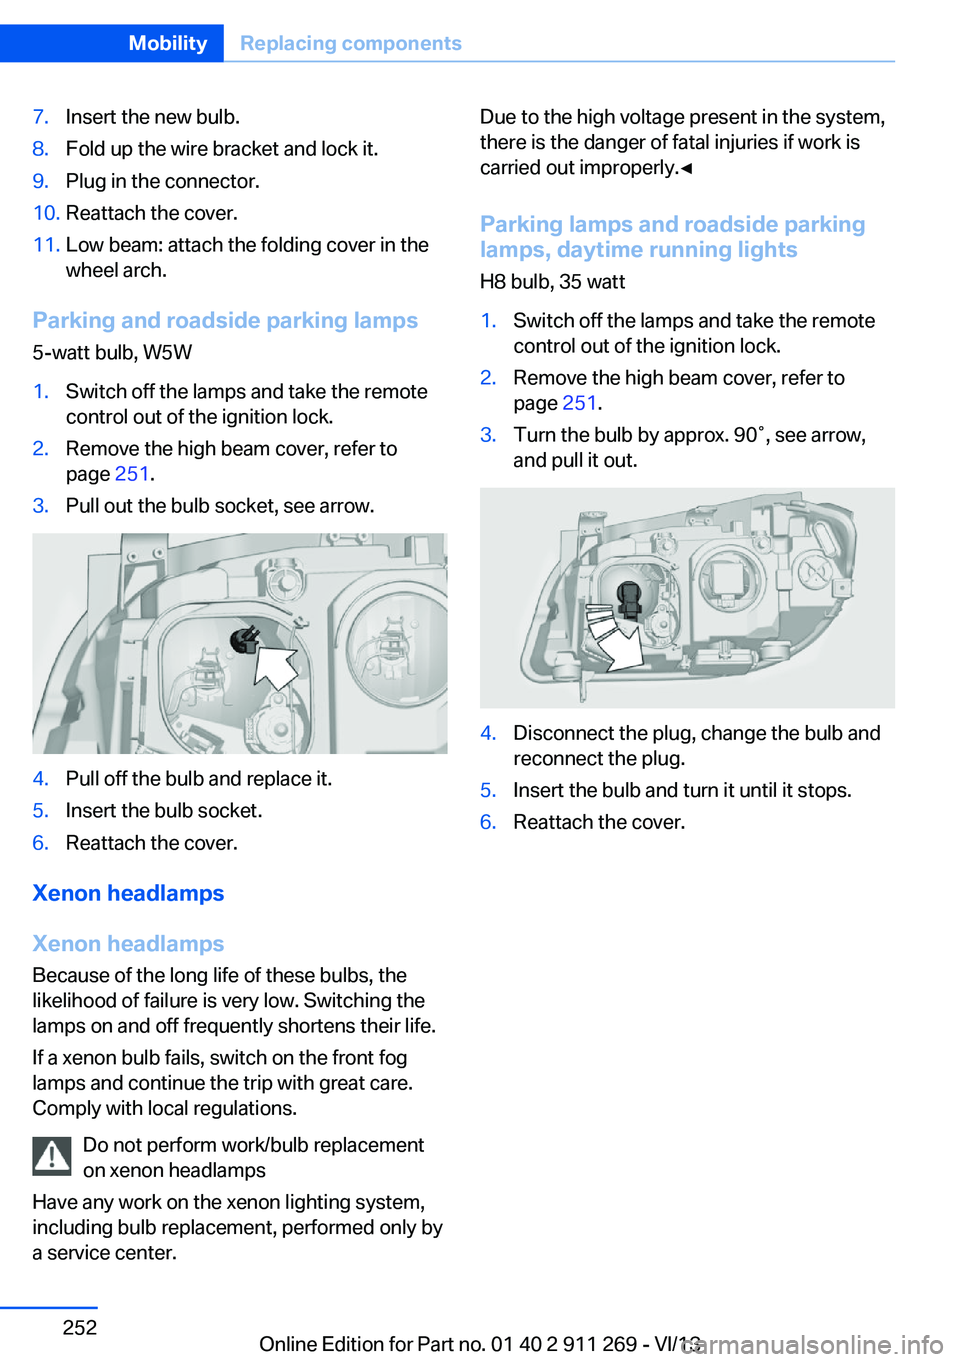 BMW X1 XDRIVE 28I 2014  Owners Manual 7.Insert the new bulb.8.Fold up the wire bracket and lock it.9.Plug in the connector.10.Reattach the cover.11.Low beam: attach the folding cover in the
wheel arch.
Parking and roadside parking lamps
5